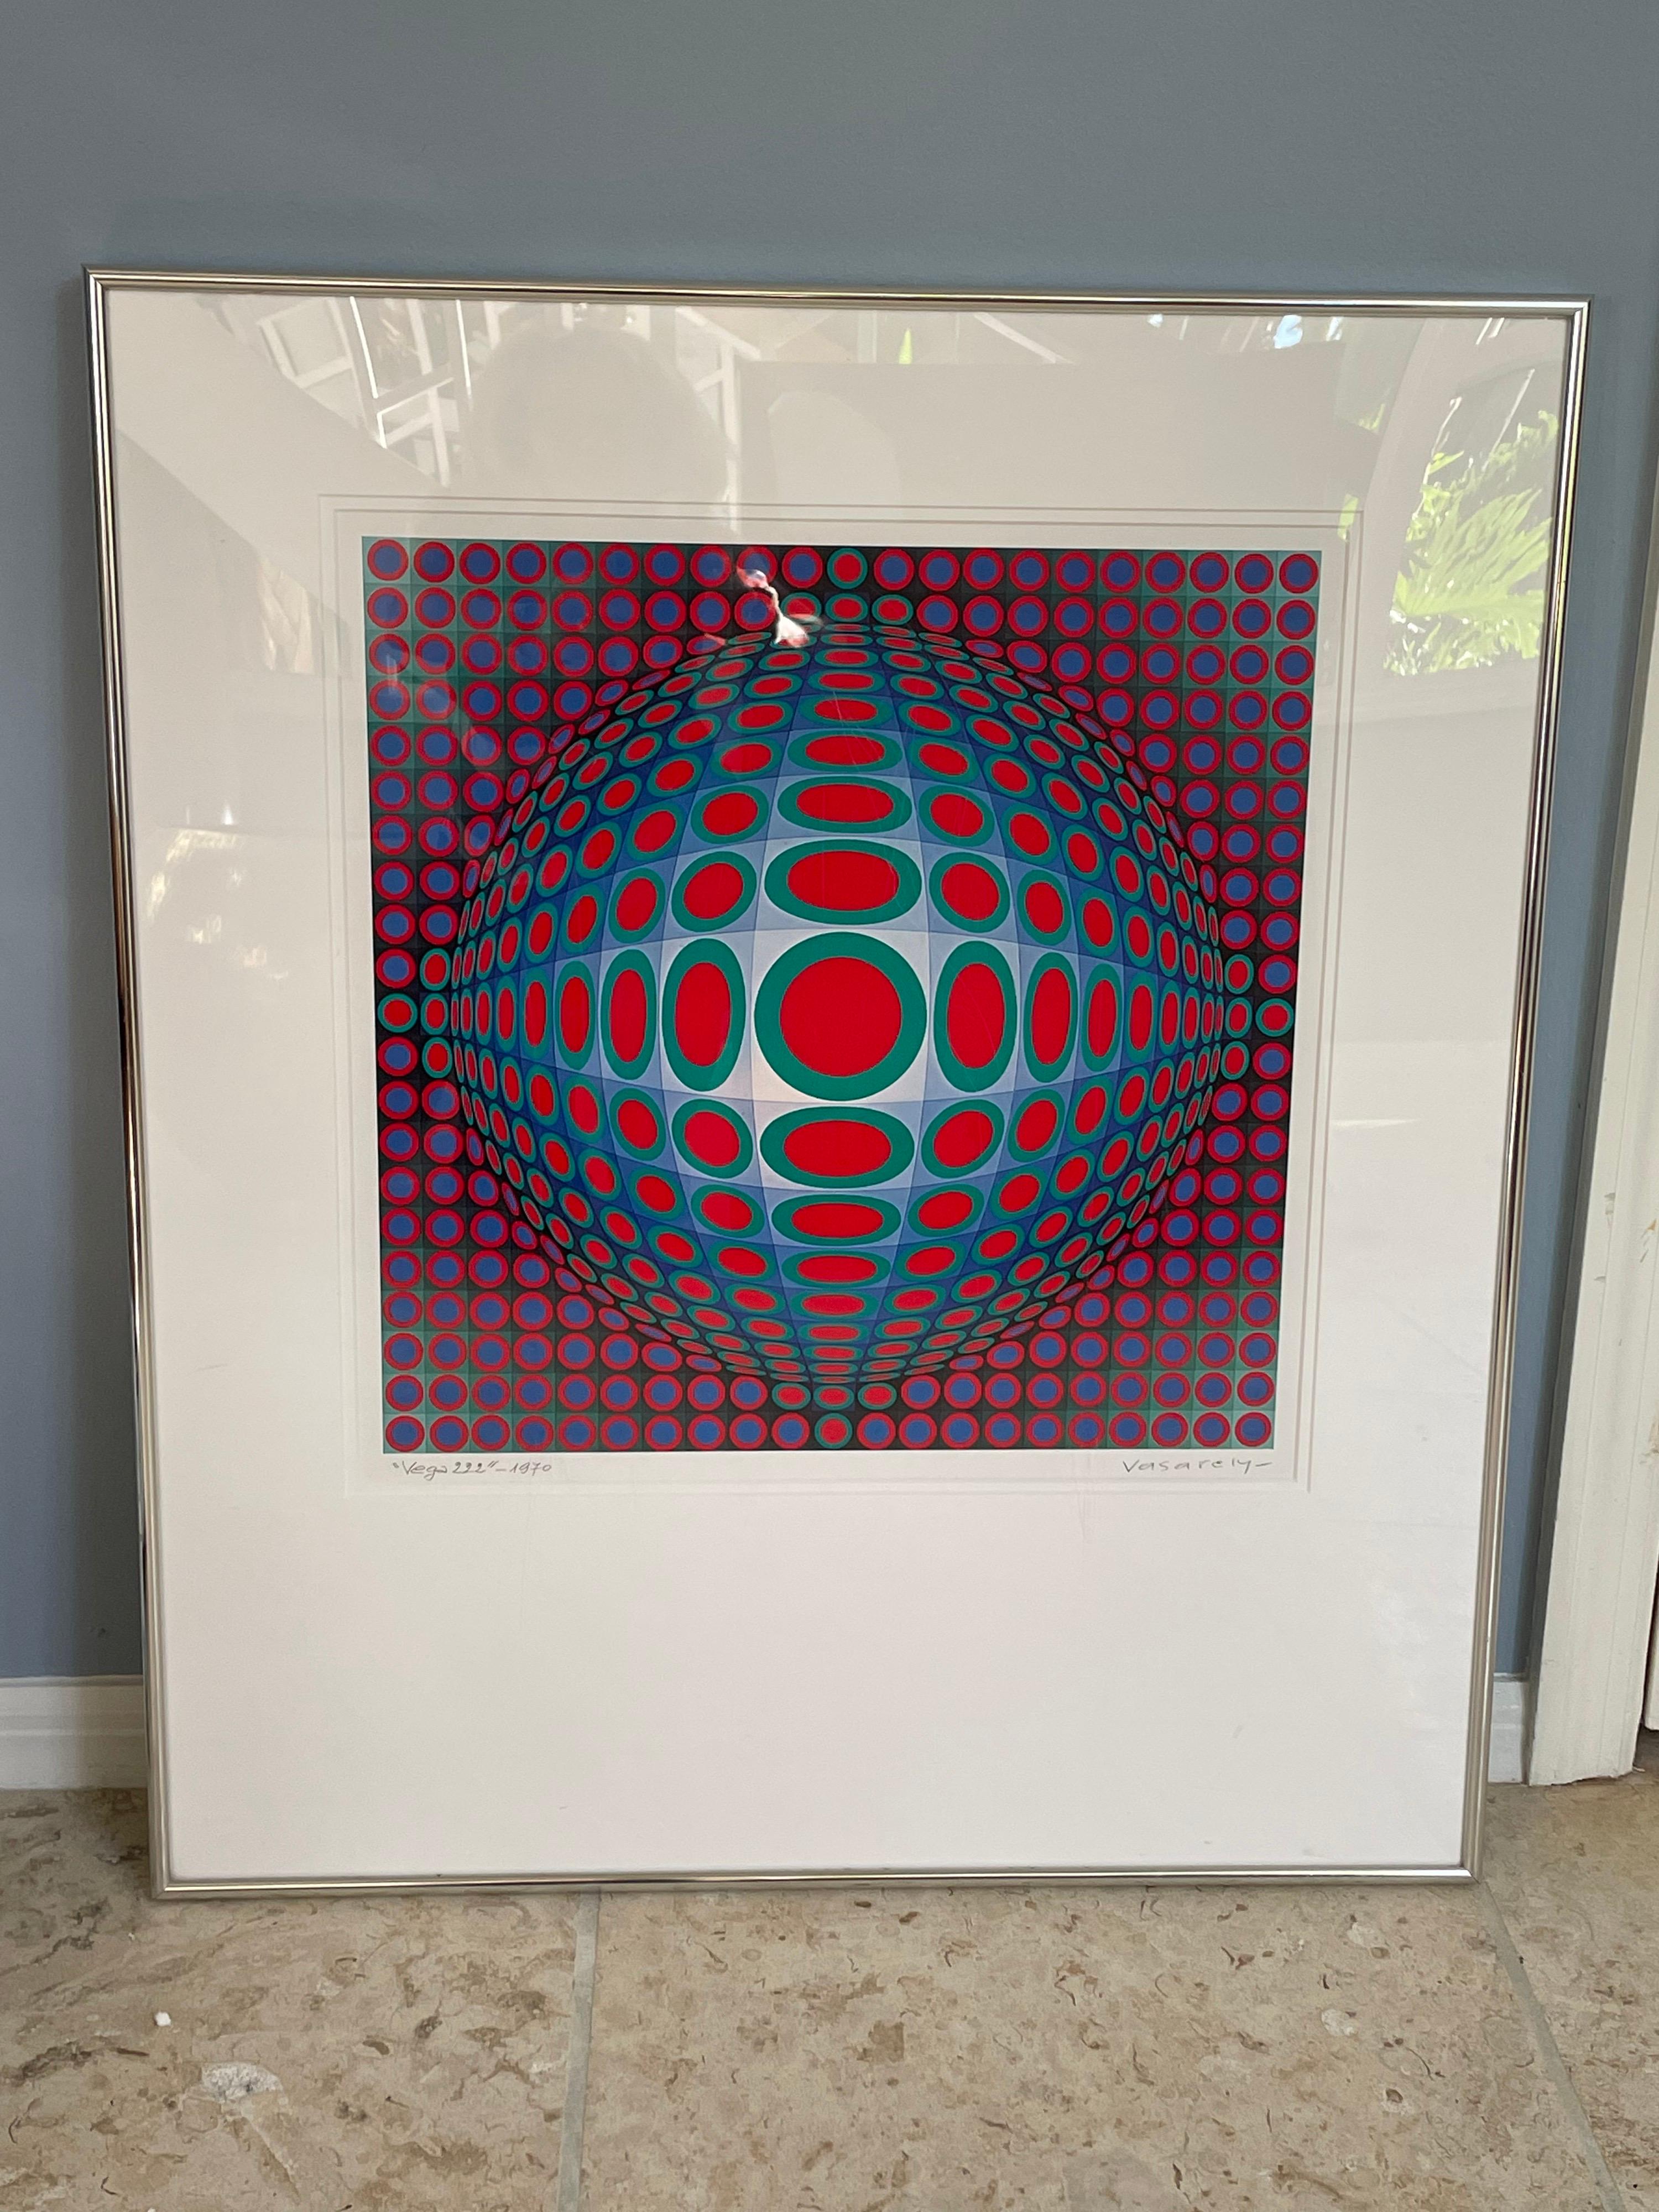 This is a vintage 1970 serigraph by Vasarely titled “Vega 222 “ in a silver metal frame and plexiglass.